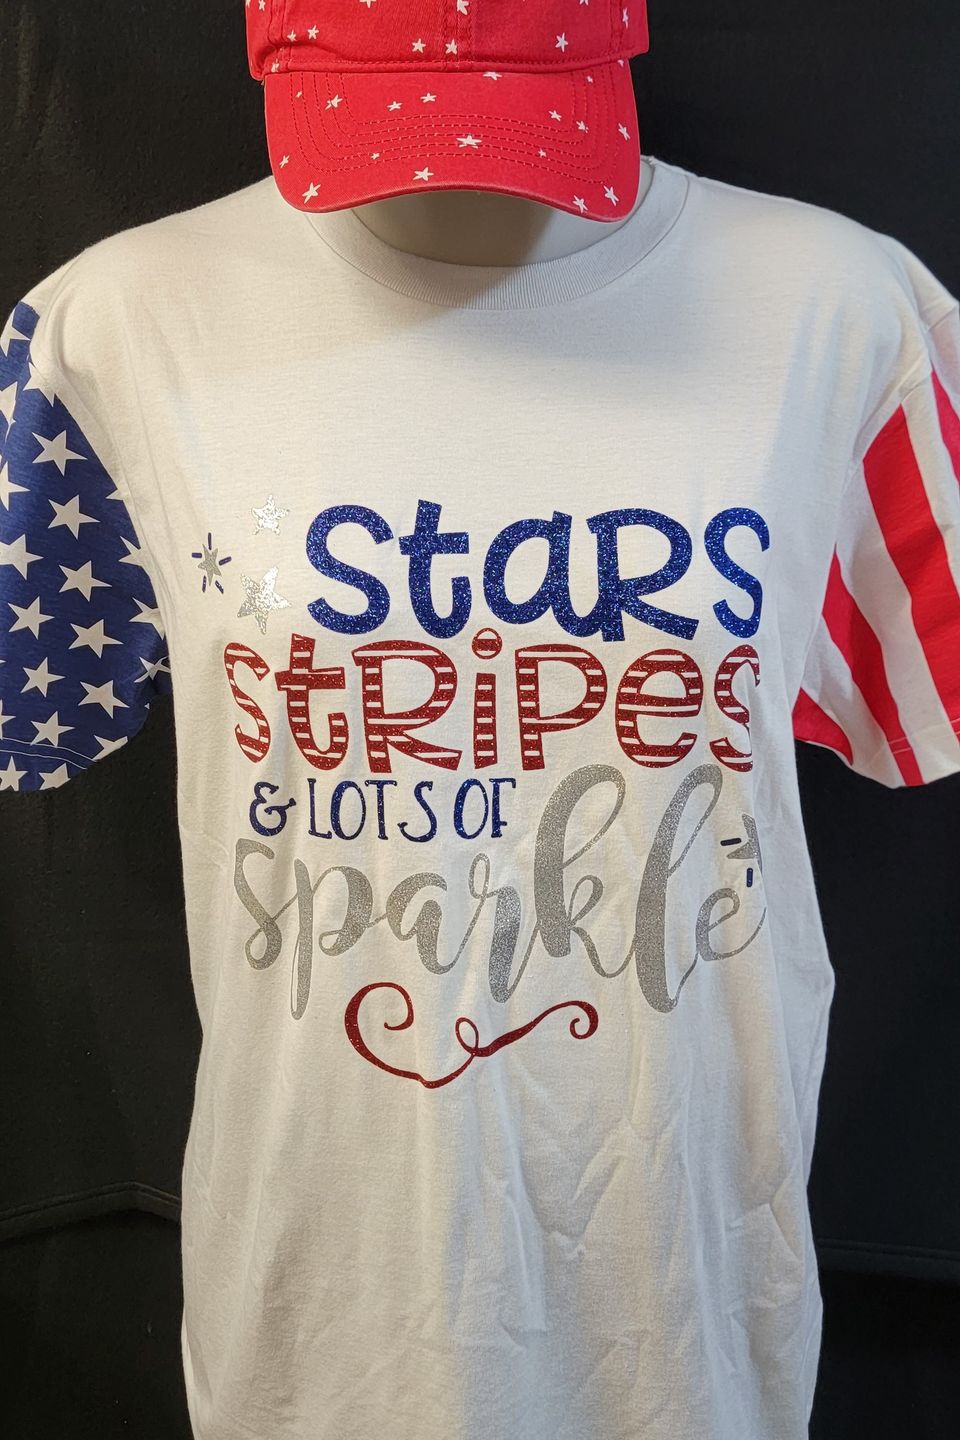 Heat Transfer Vinyl with patriotic stars and stripes on shirt and cap